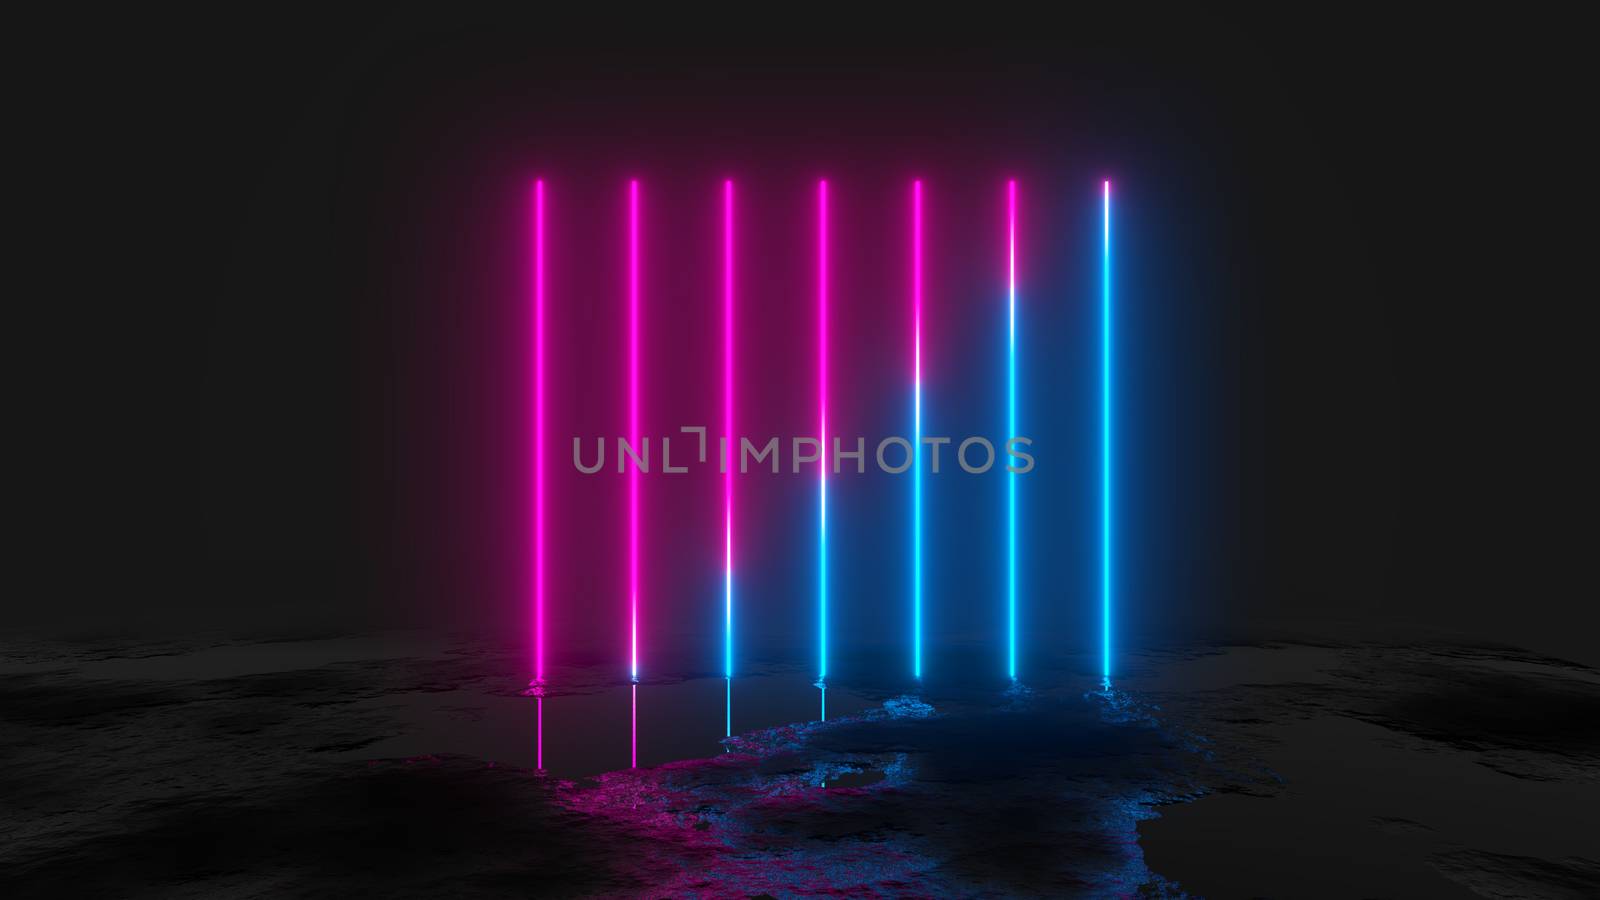 Glowing vertical neon lines, abstract background, 3D illustration